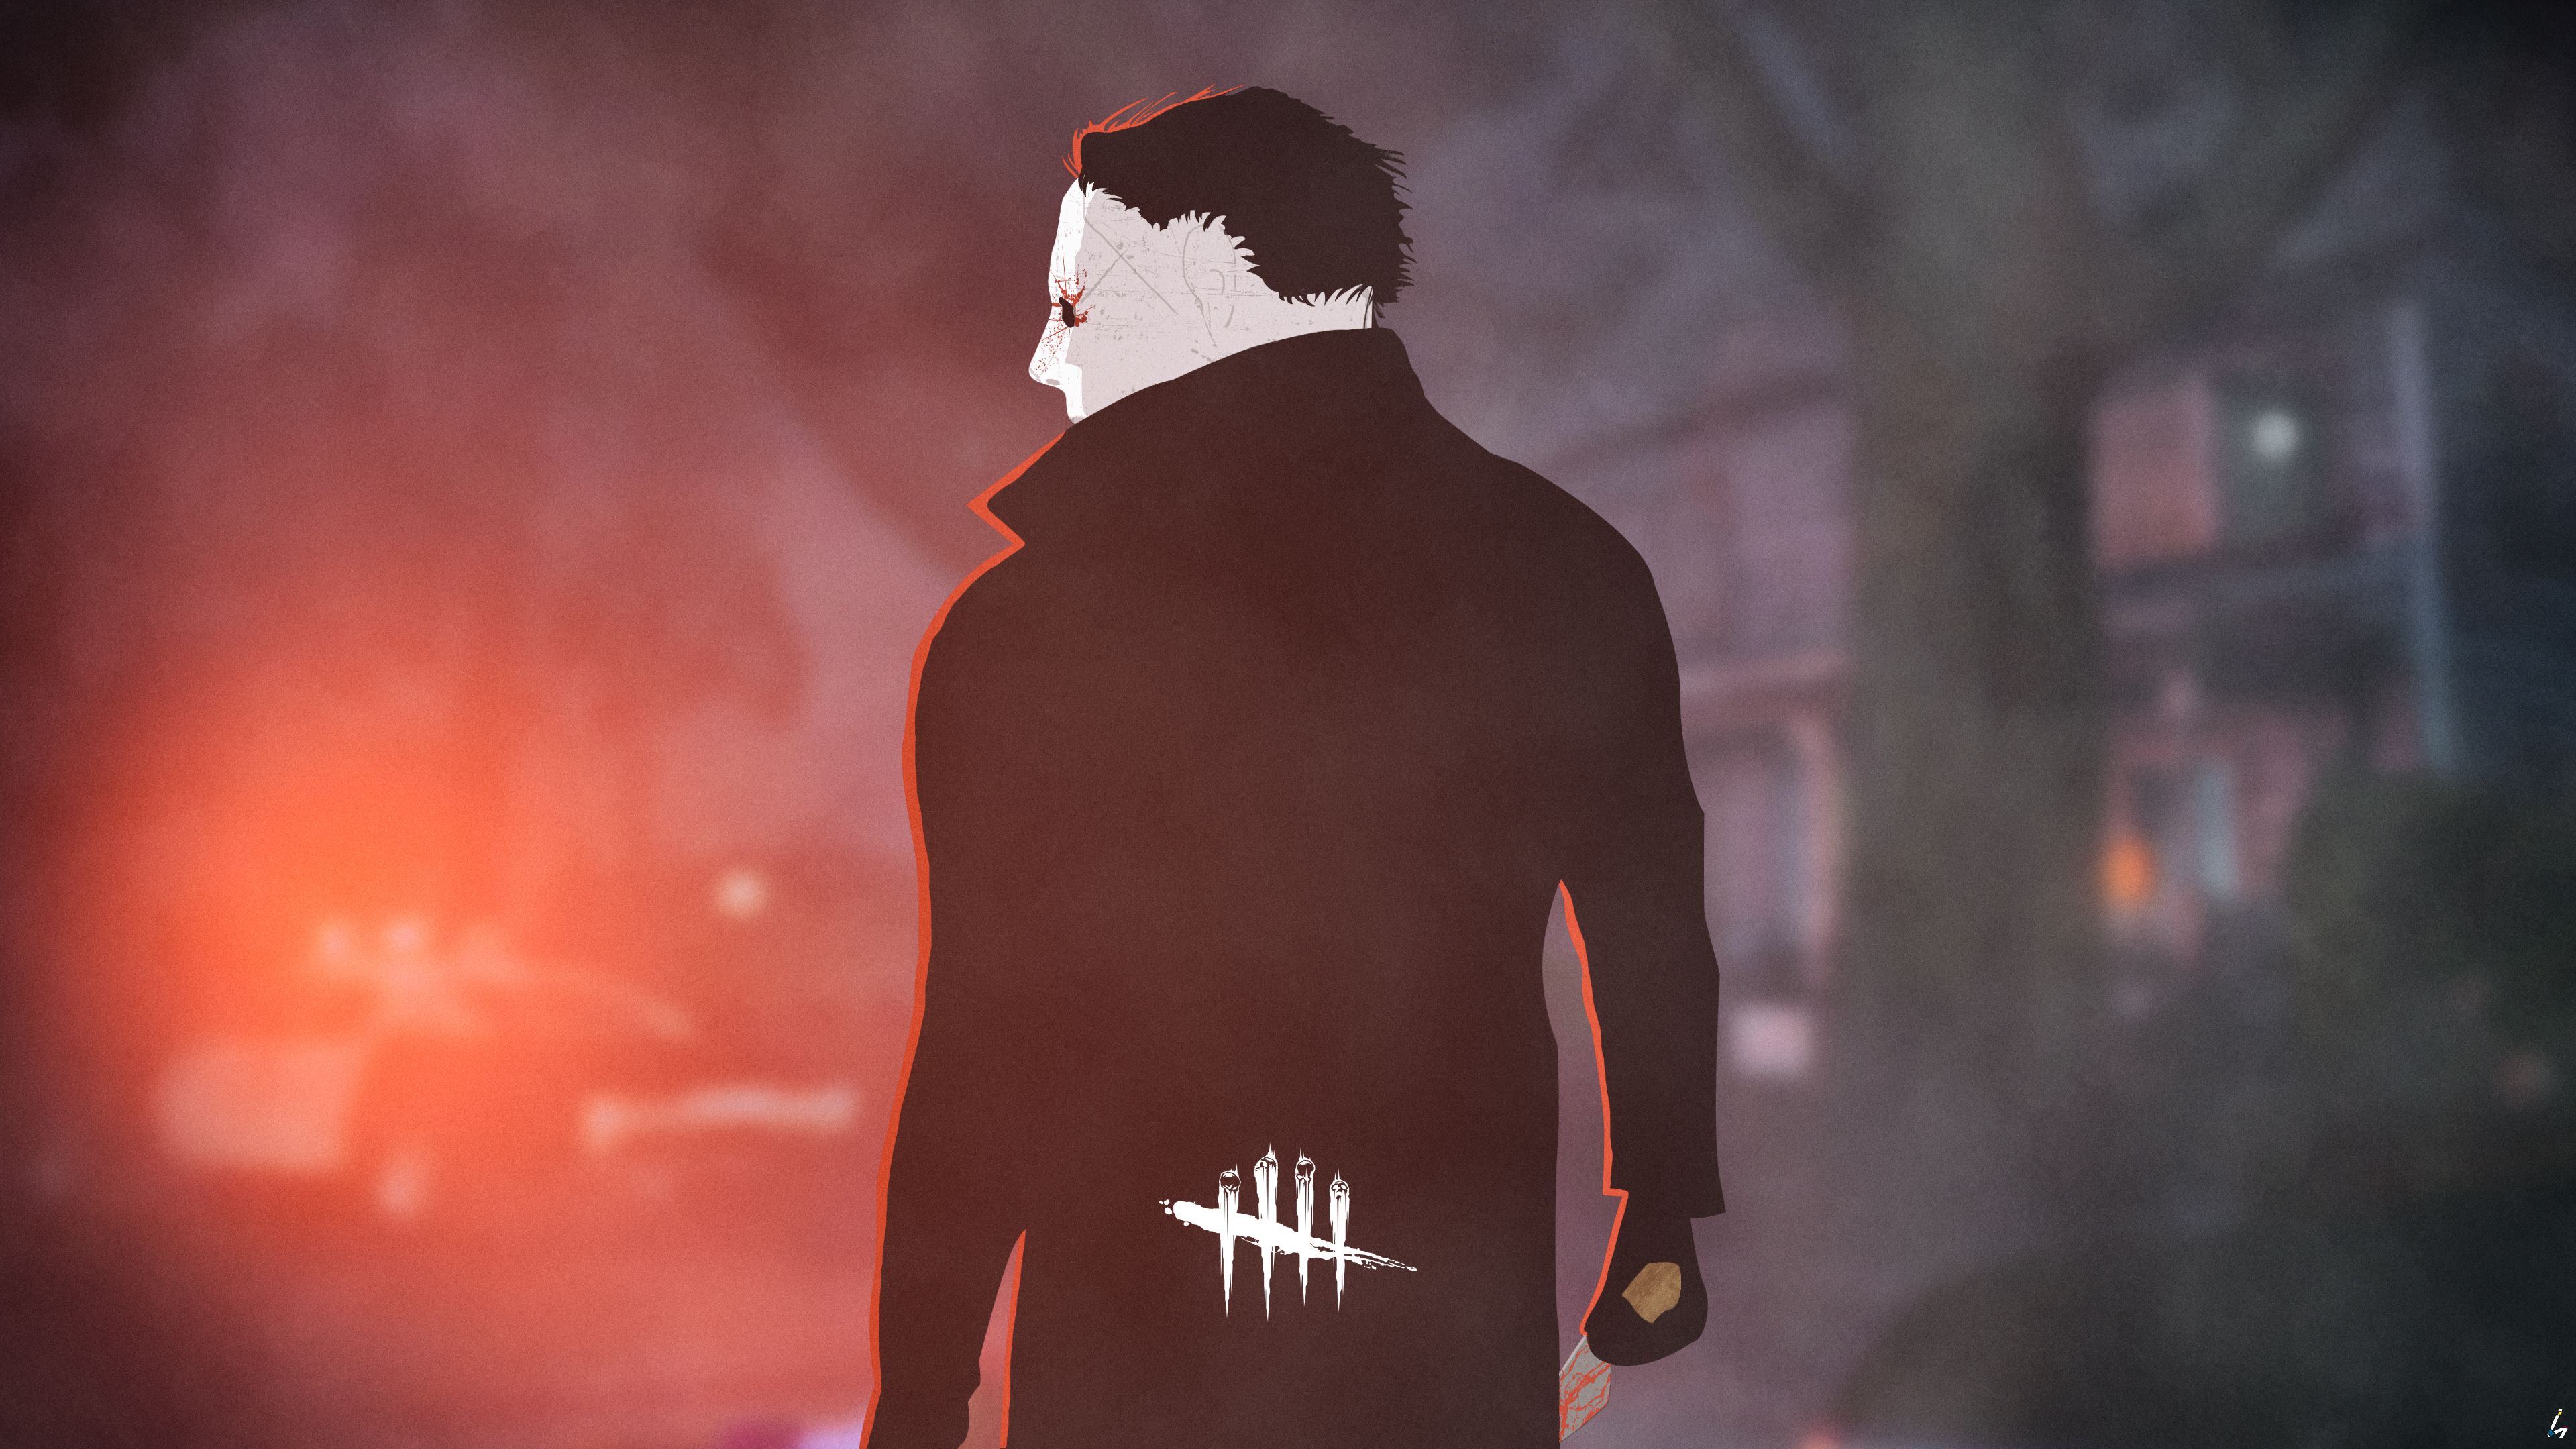 Dead by Daylight Game 2020 Wallpapers